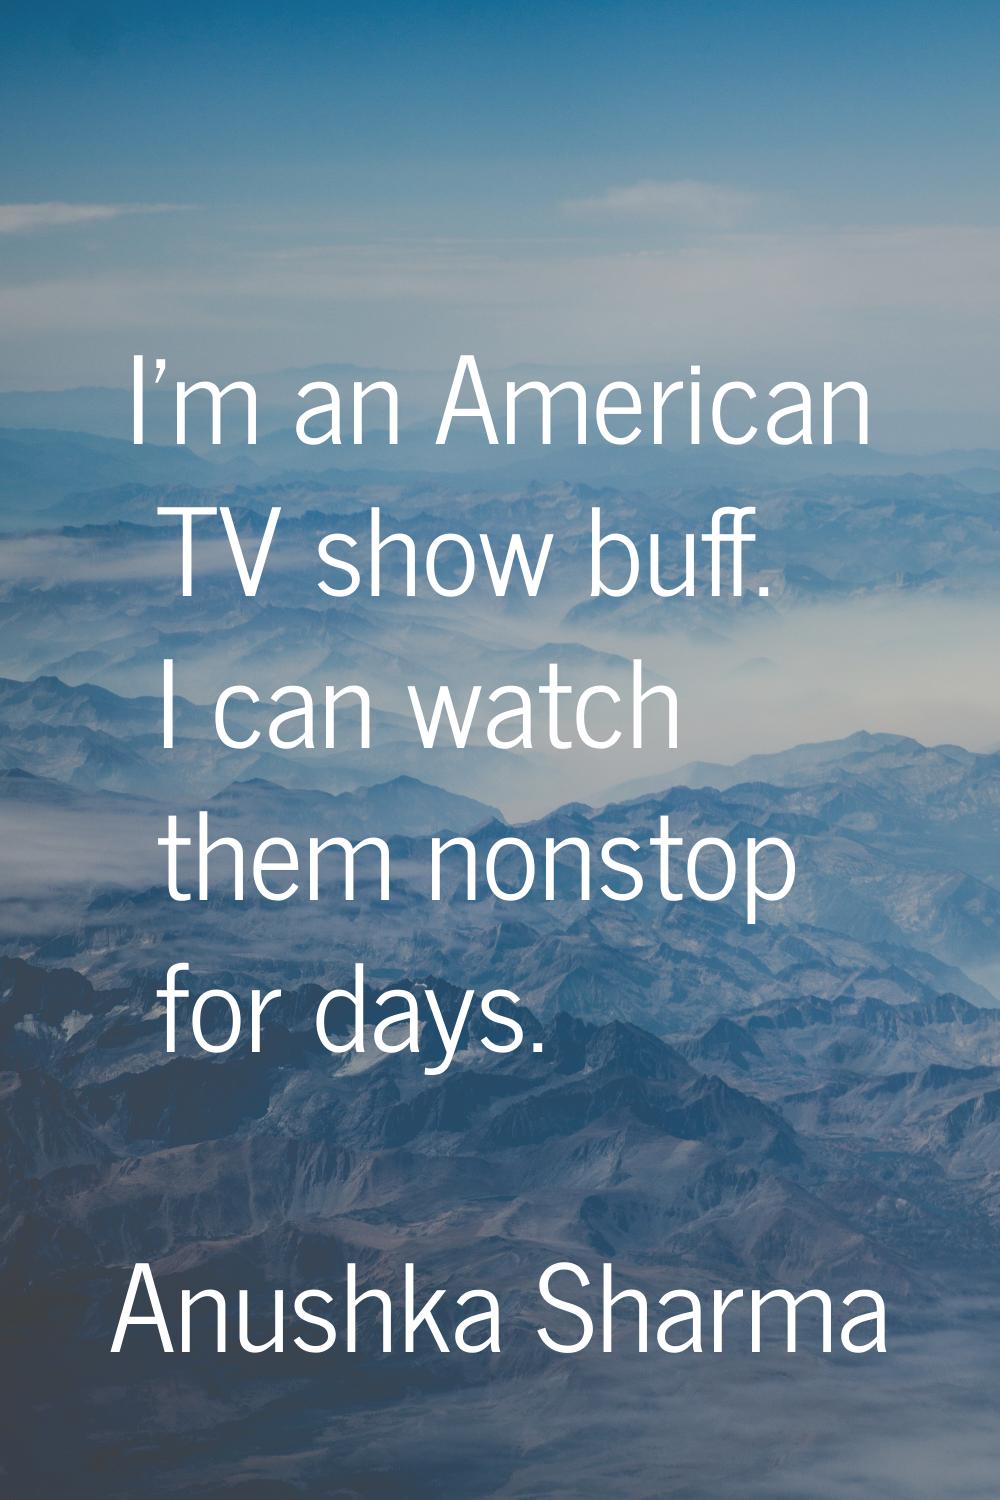 I'm an American TV show buff. I can watch them nonstop for days.